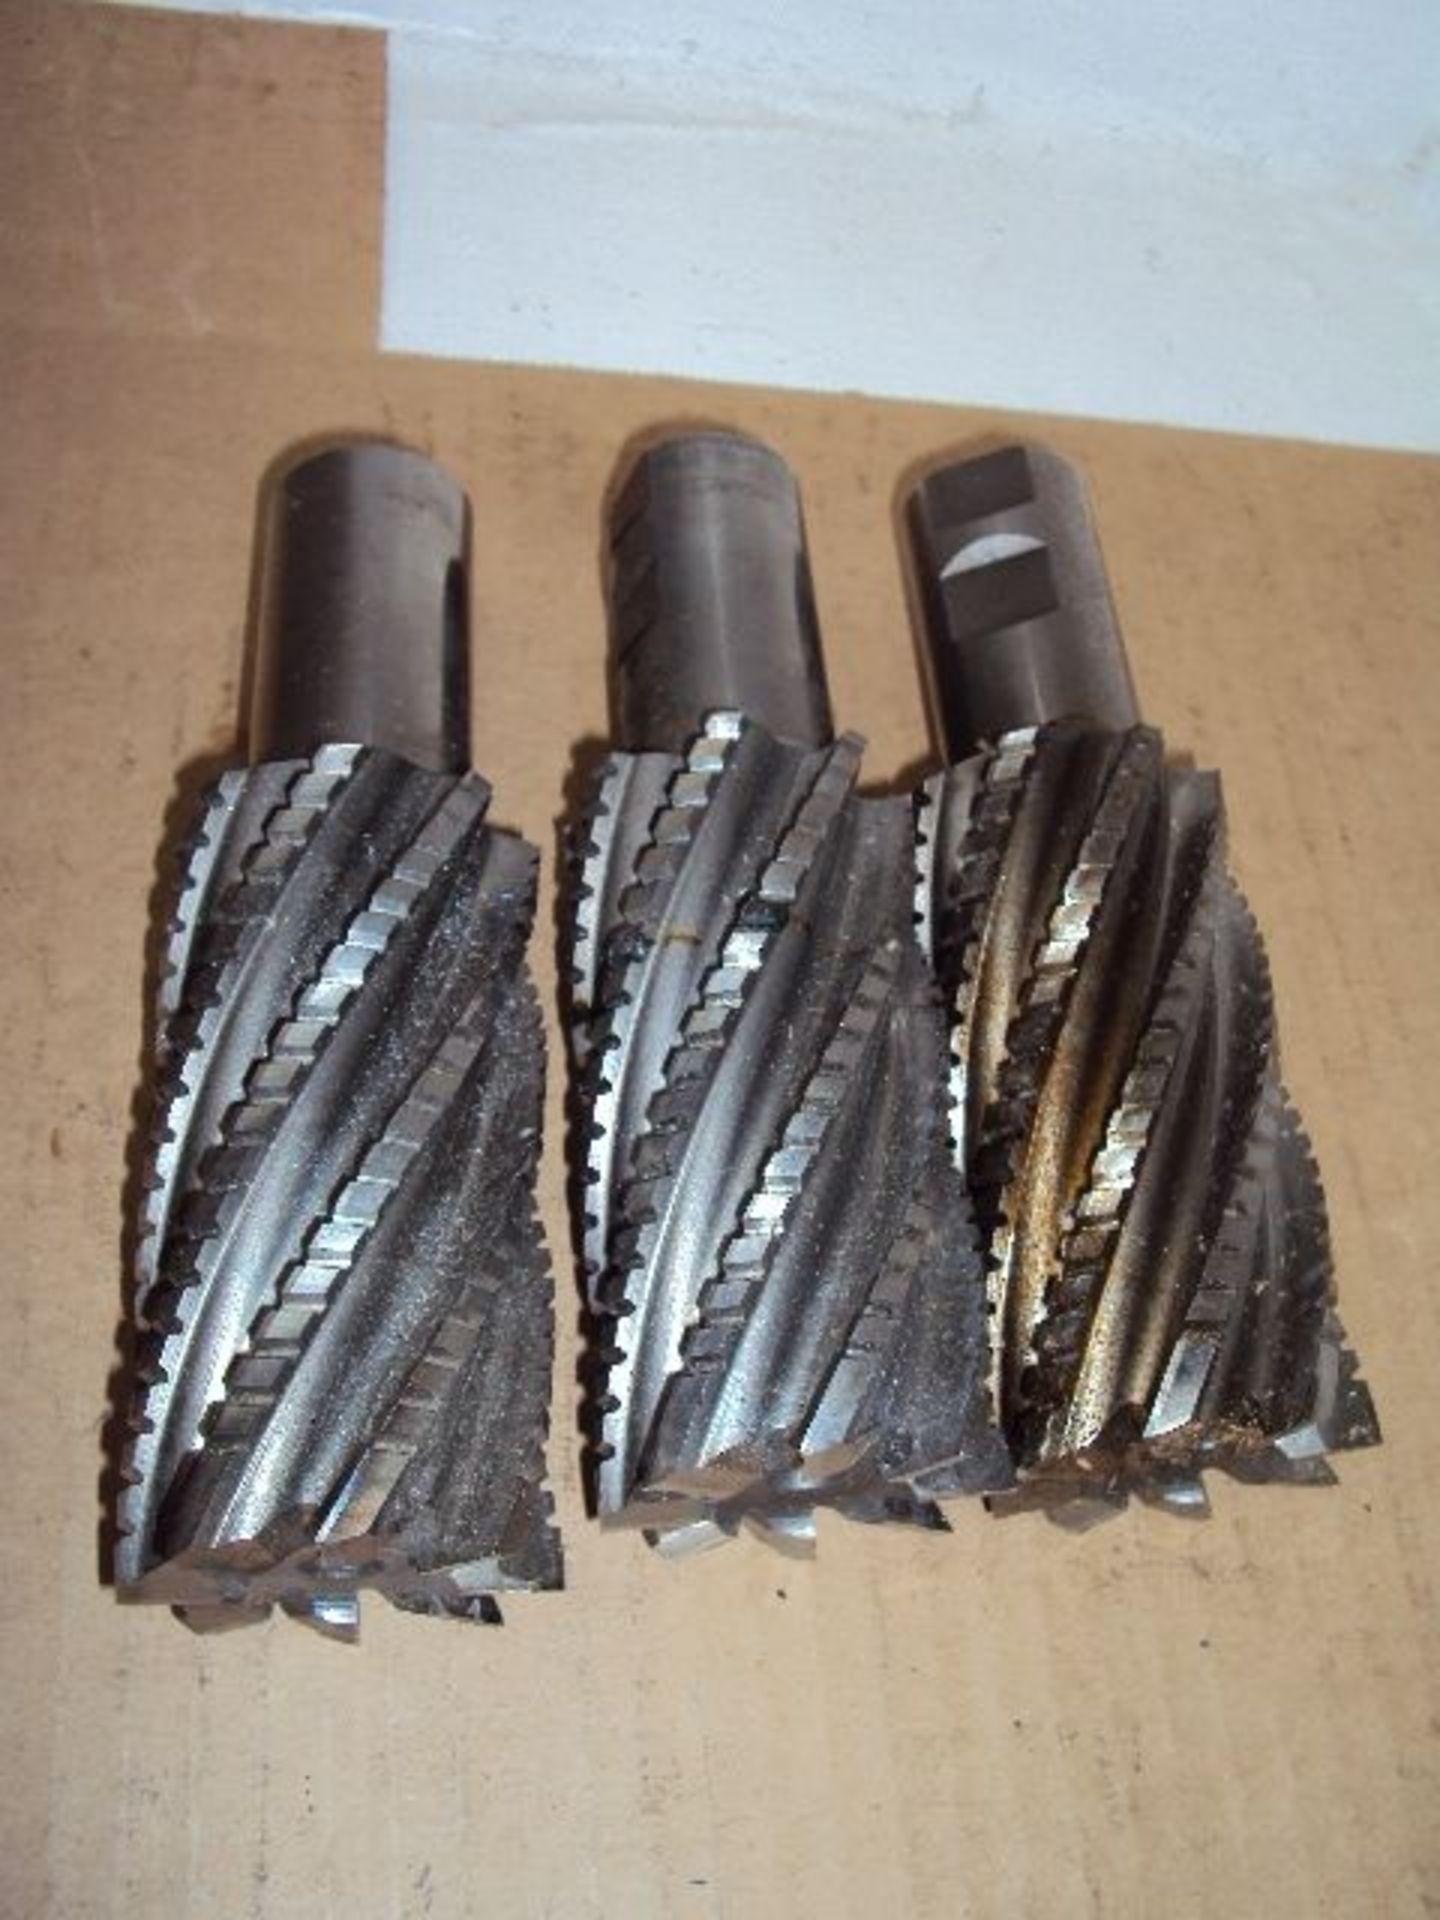 (16) Assorted HSS Roughing End Mills (3) 2”, (7) 1-1/2”, (2) 1”, (2) 3/4”, (2) 1/2” - Image 2 of 7